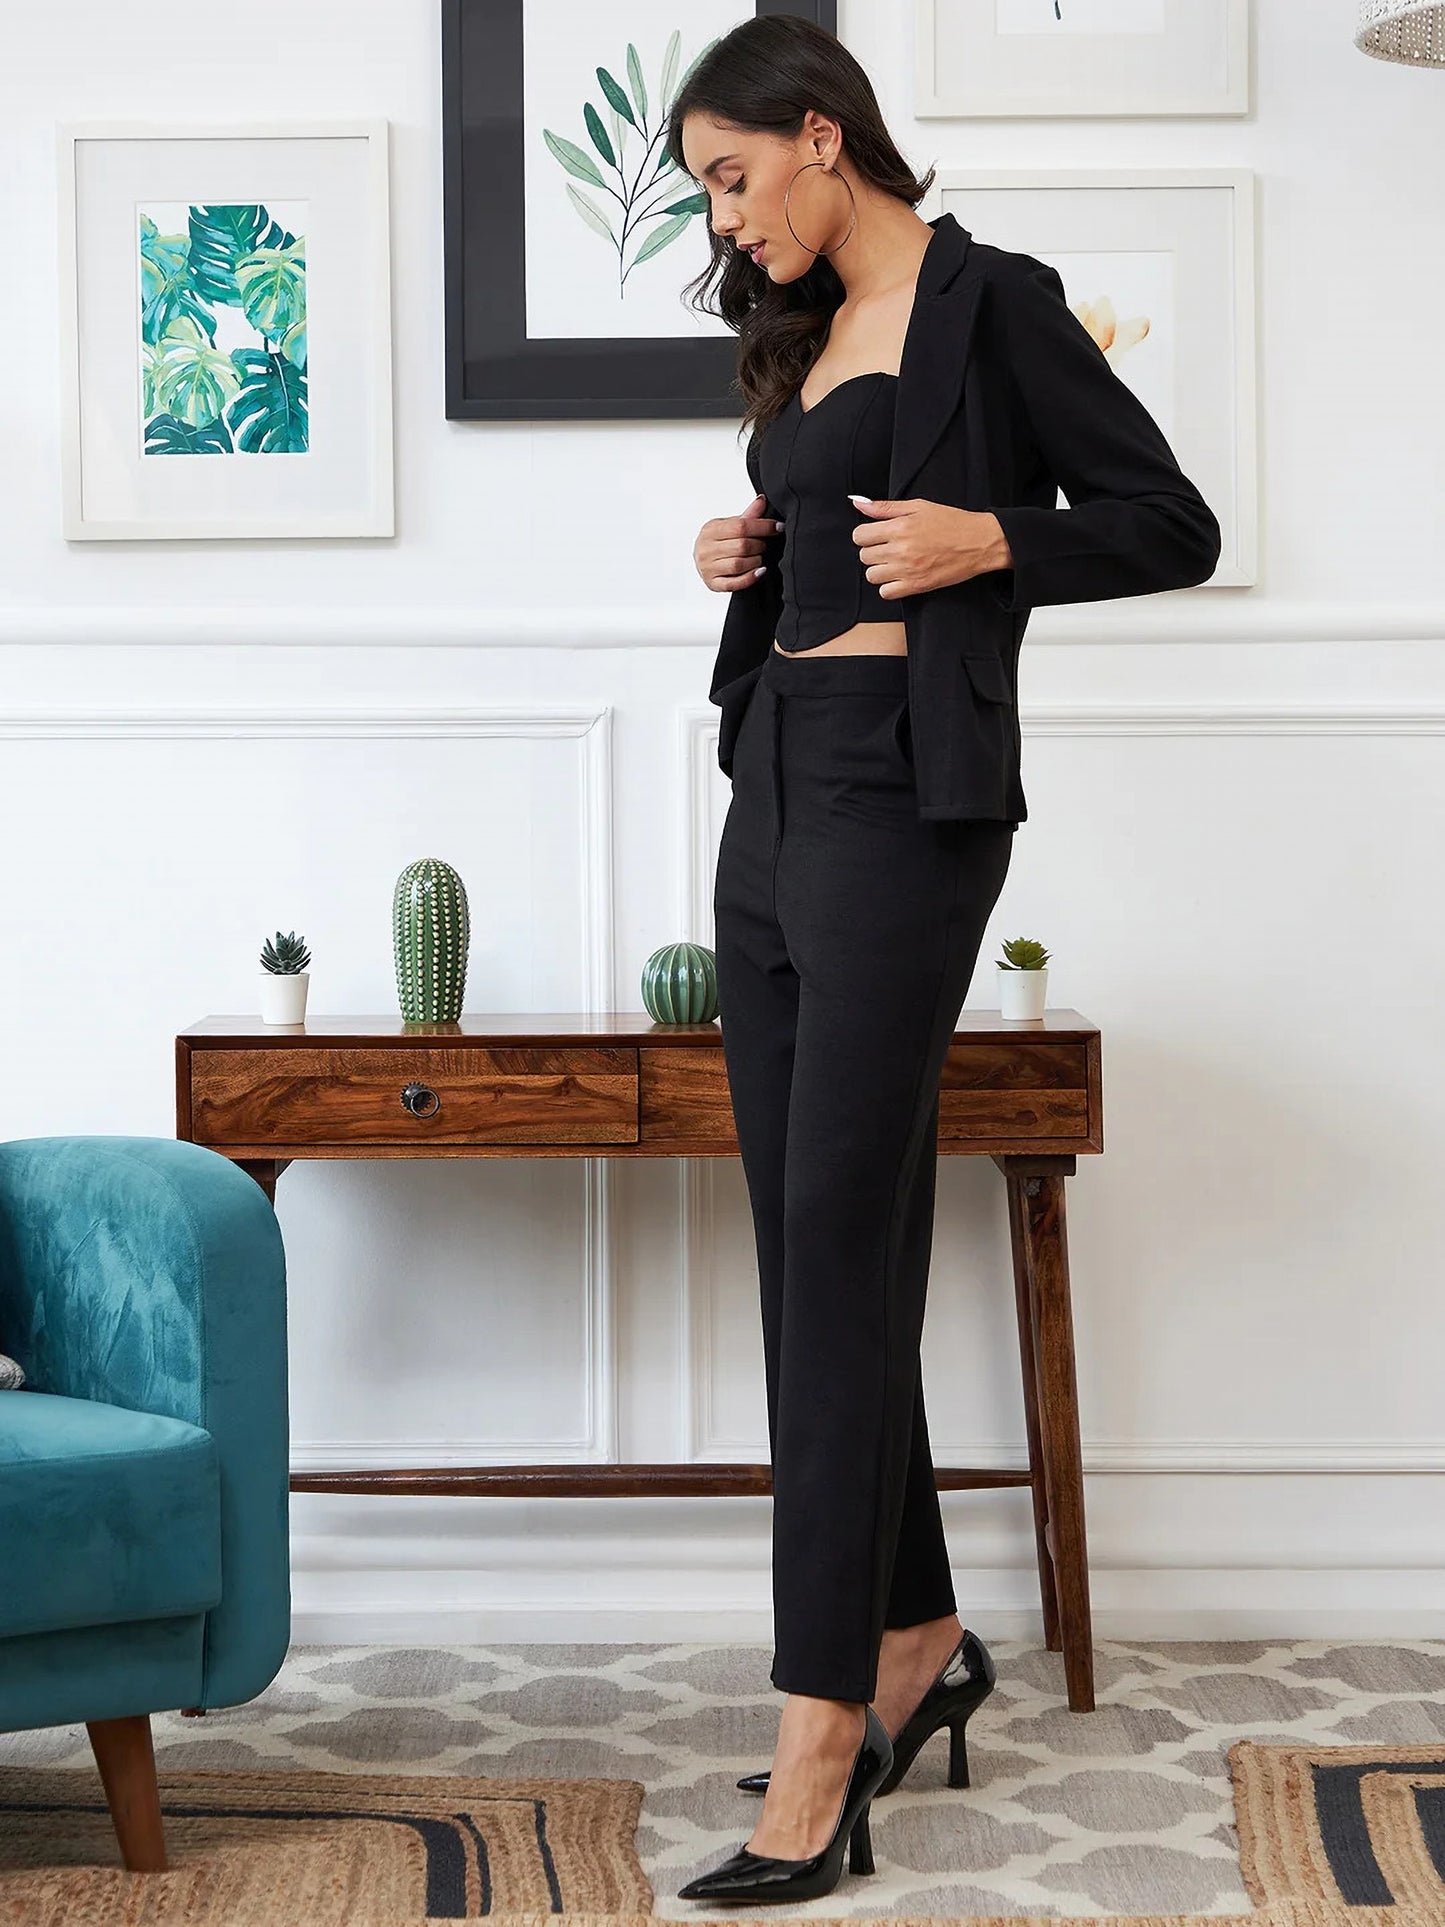 Black Lycra Solid Three Piece Outfits Blazer Co-Ord Set